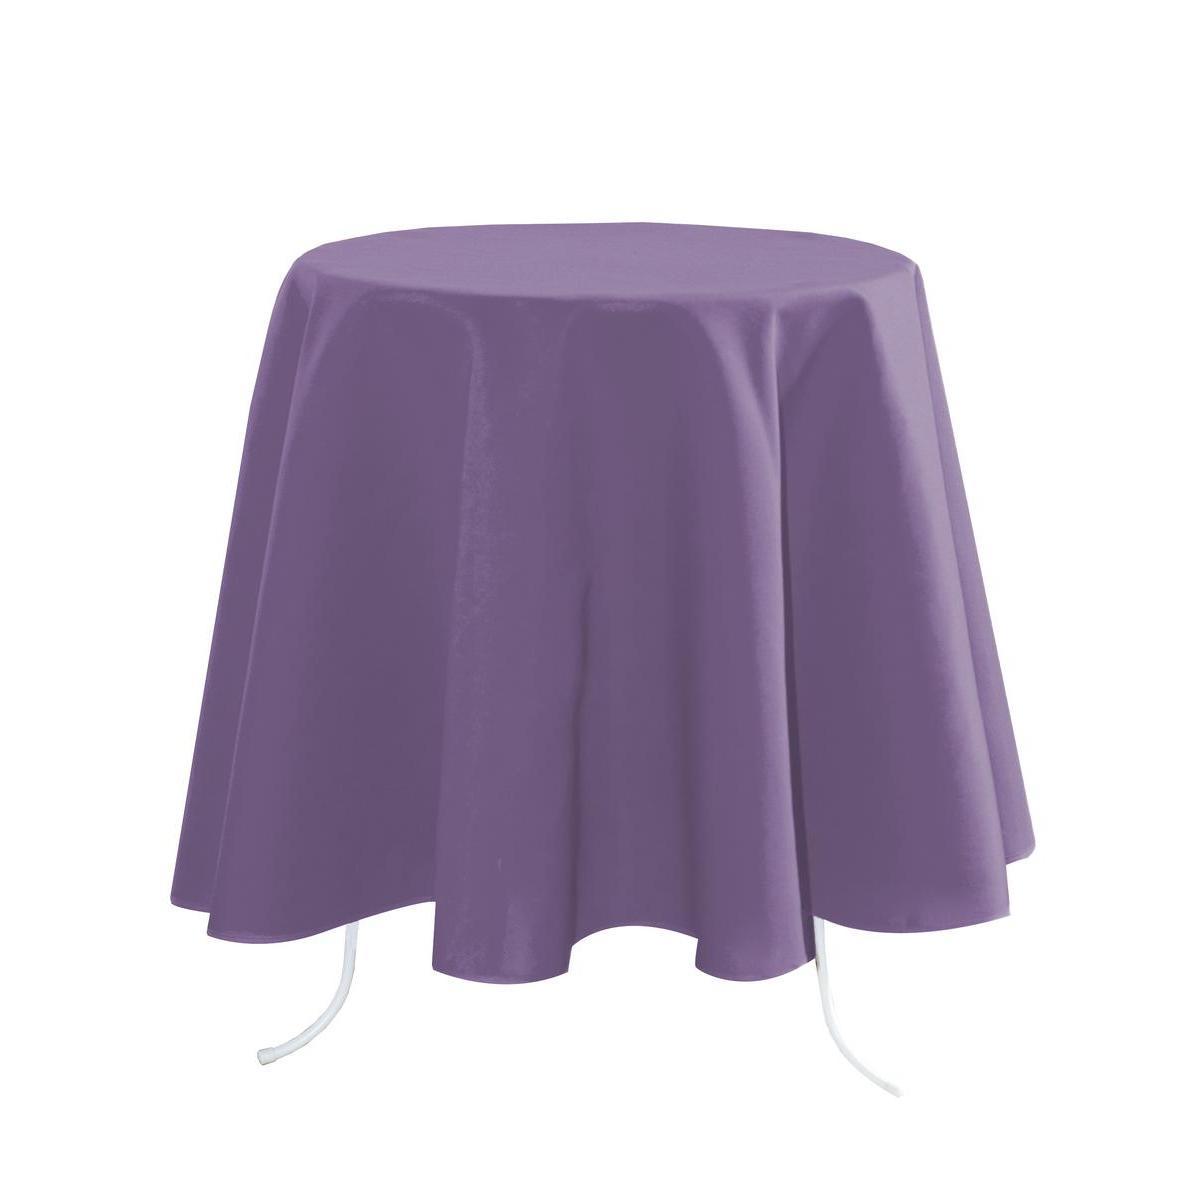 Nappe rectangulaire - 100 % Polyester - 148 x 300 cm - Violet